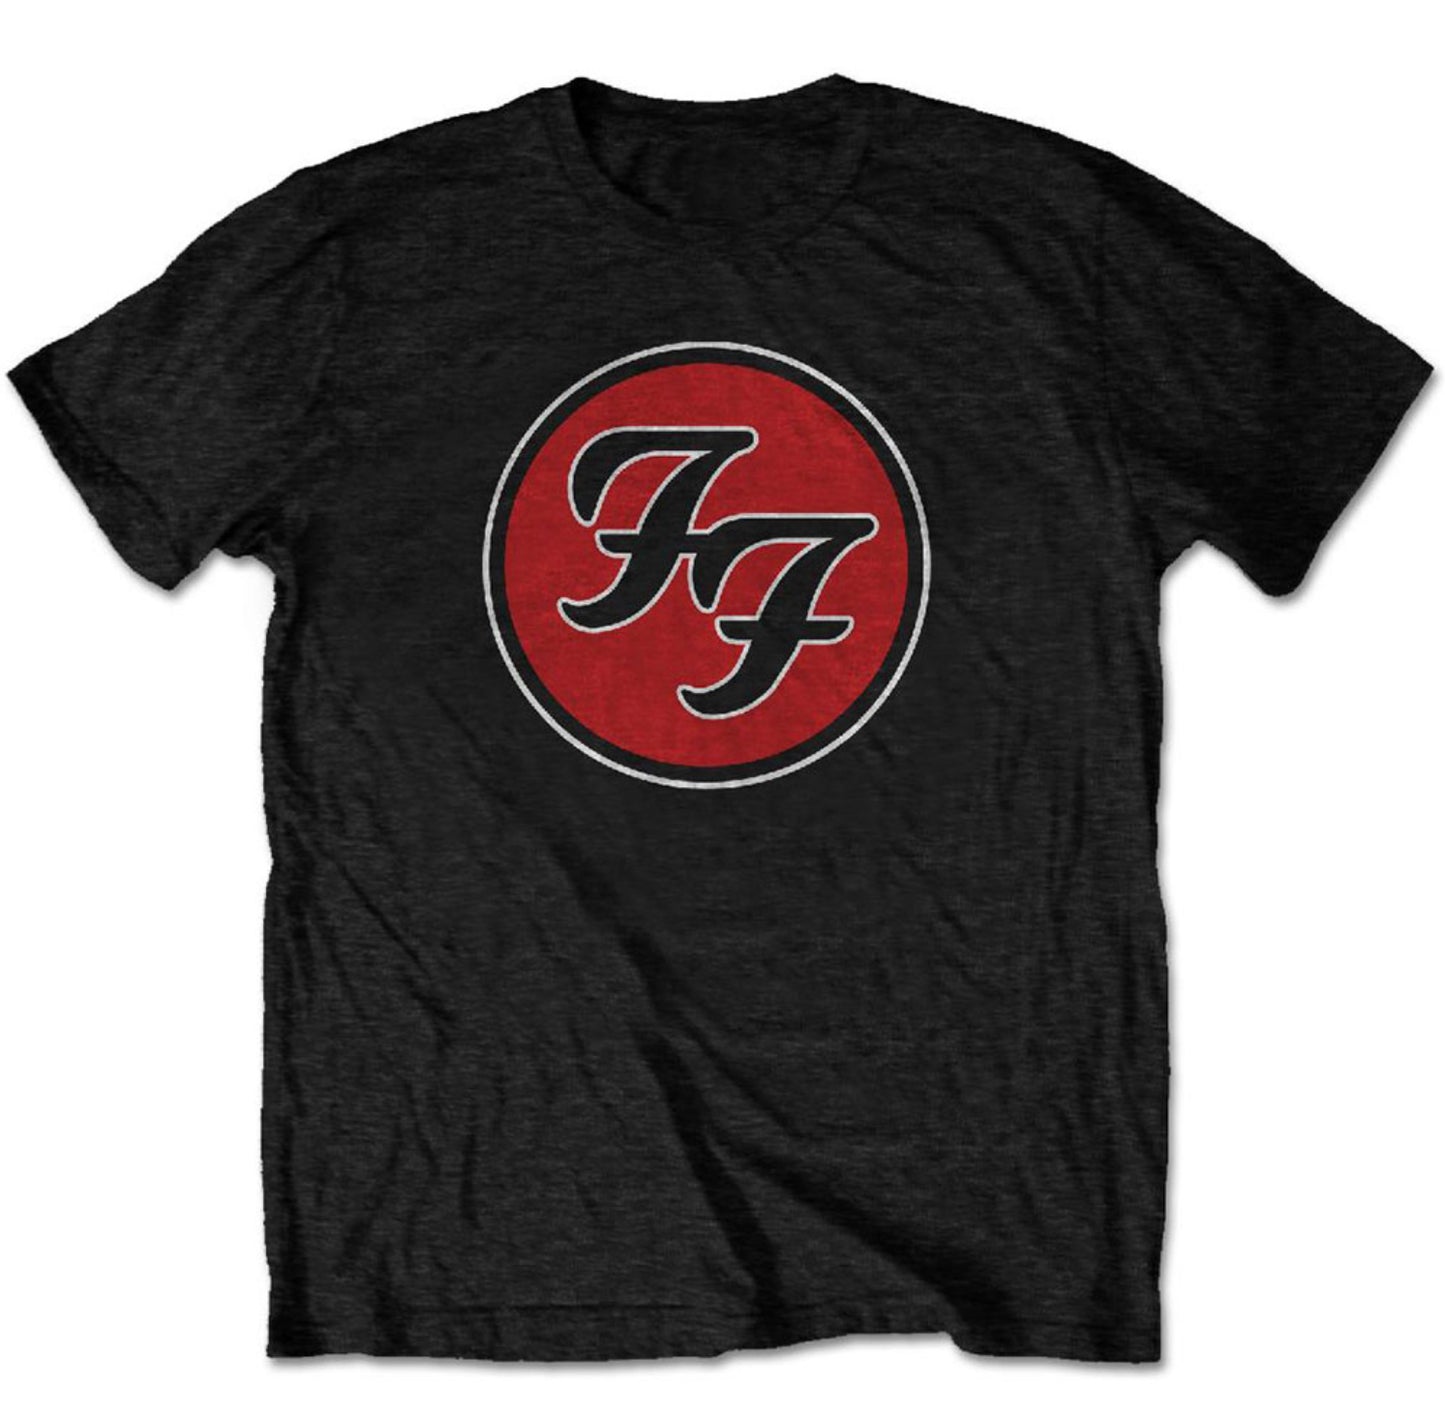 Foo Fighters T-shirts